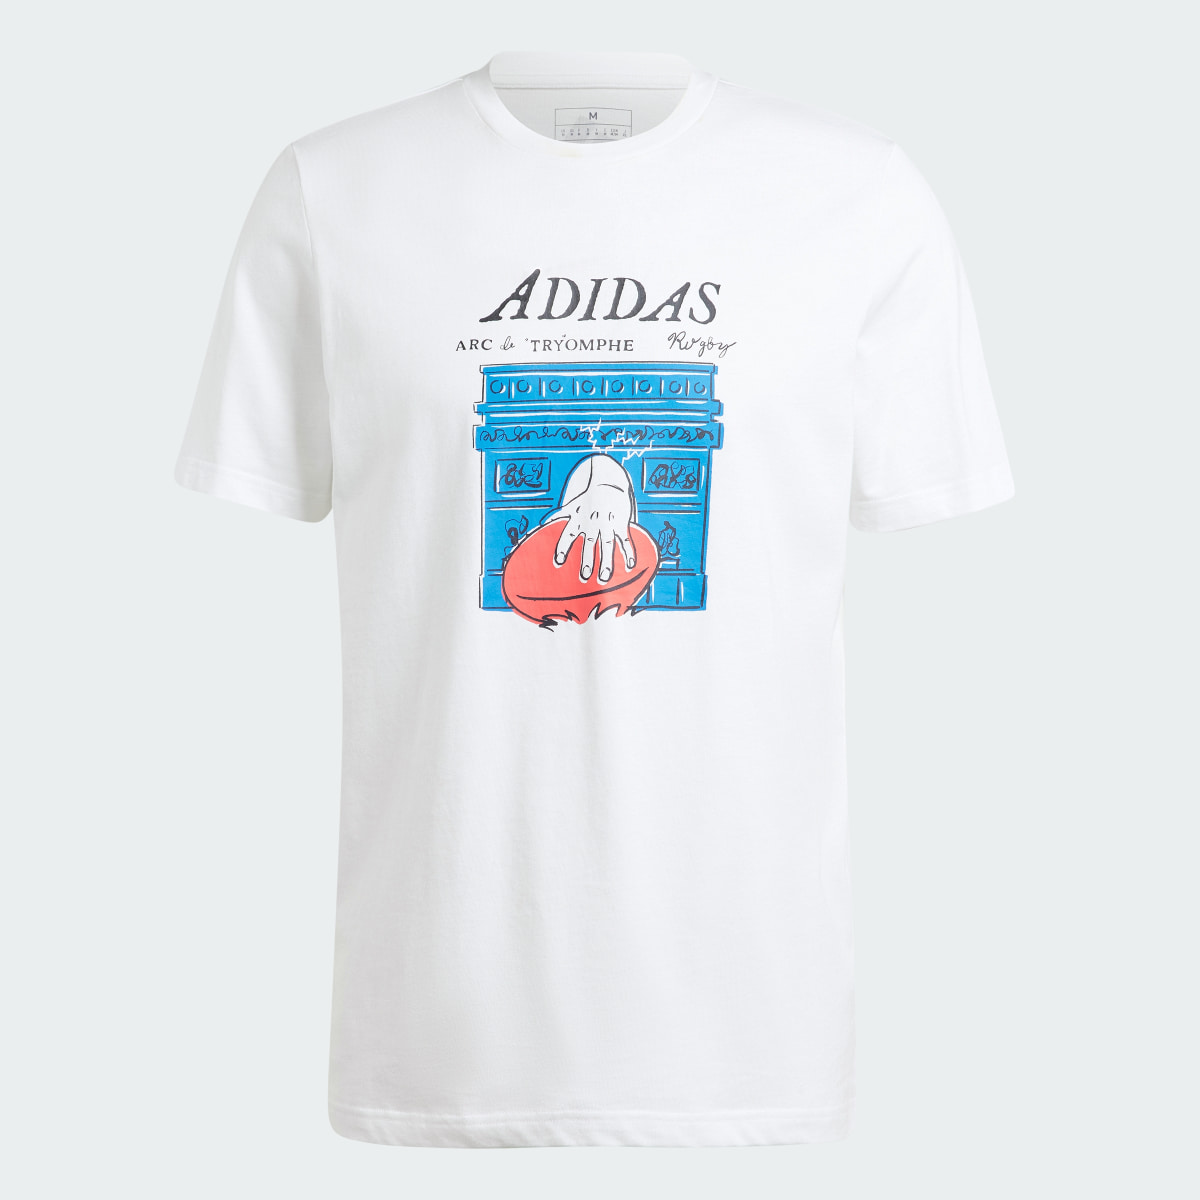 Adidas T-shirt de rugby graphique Tryomphe. 5